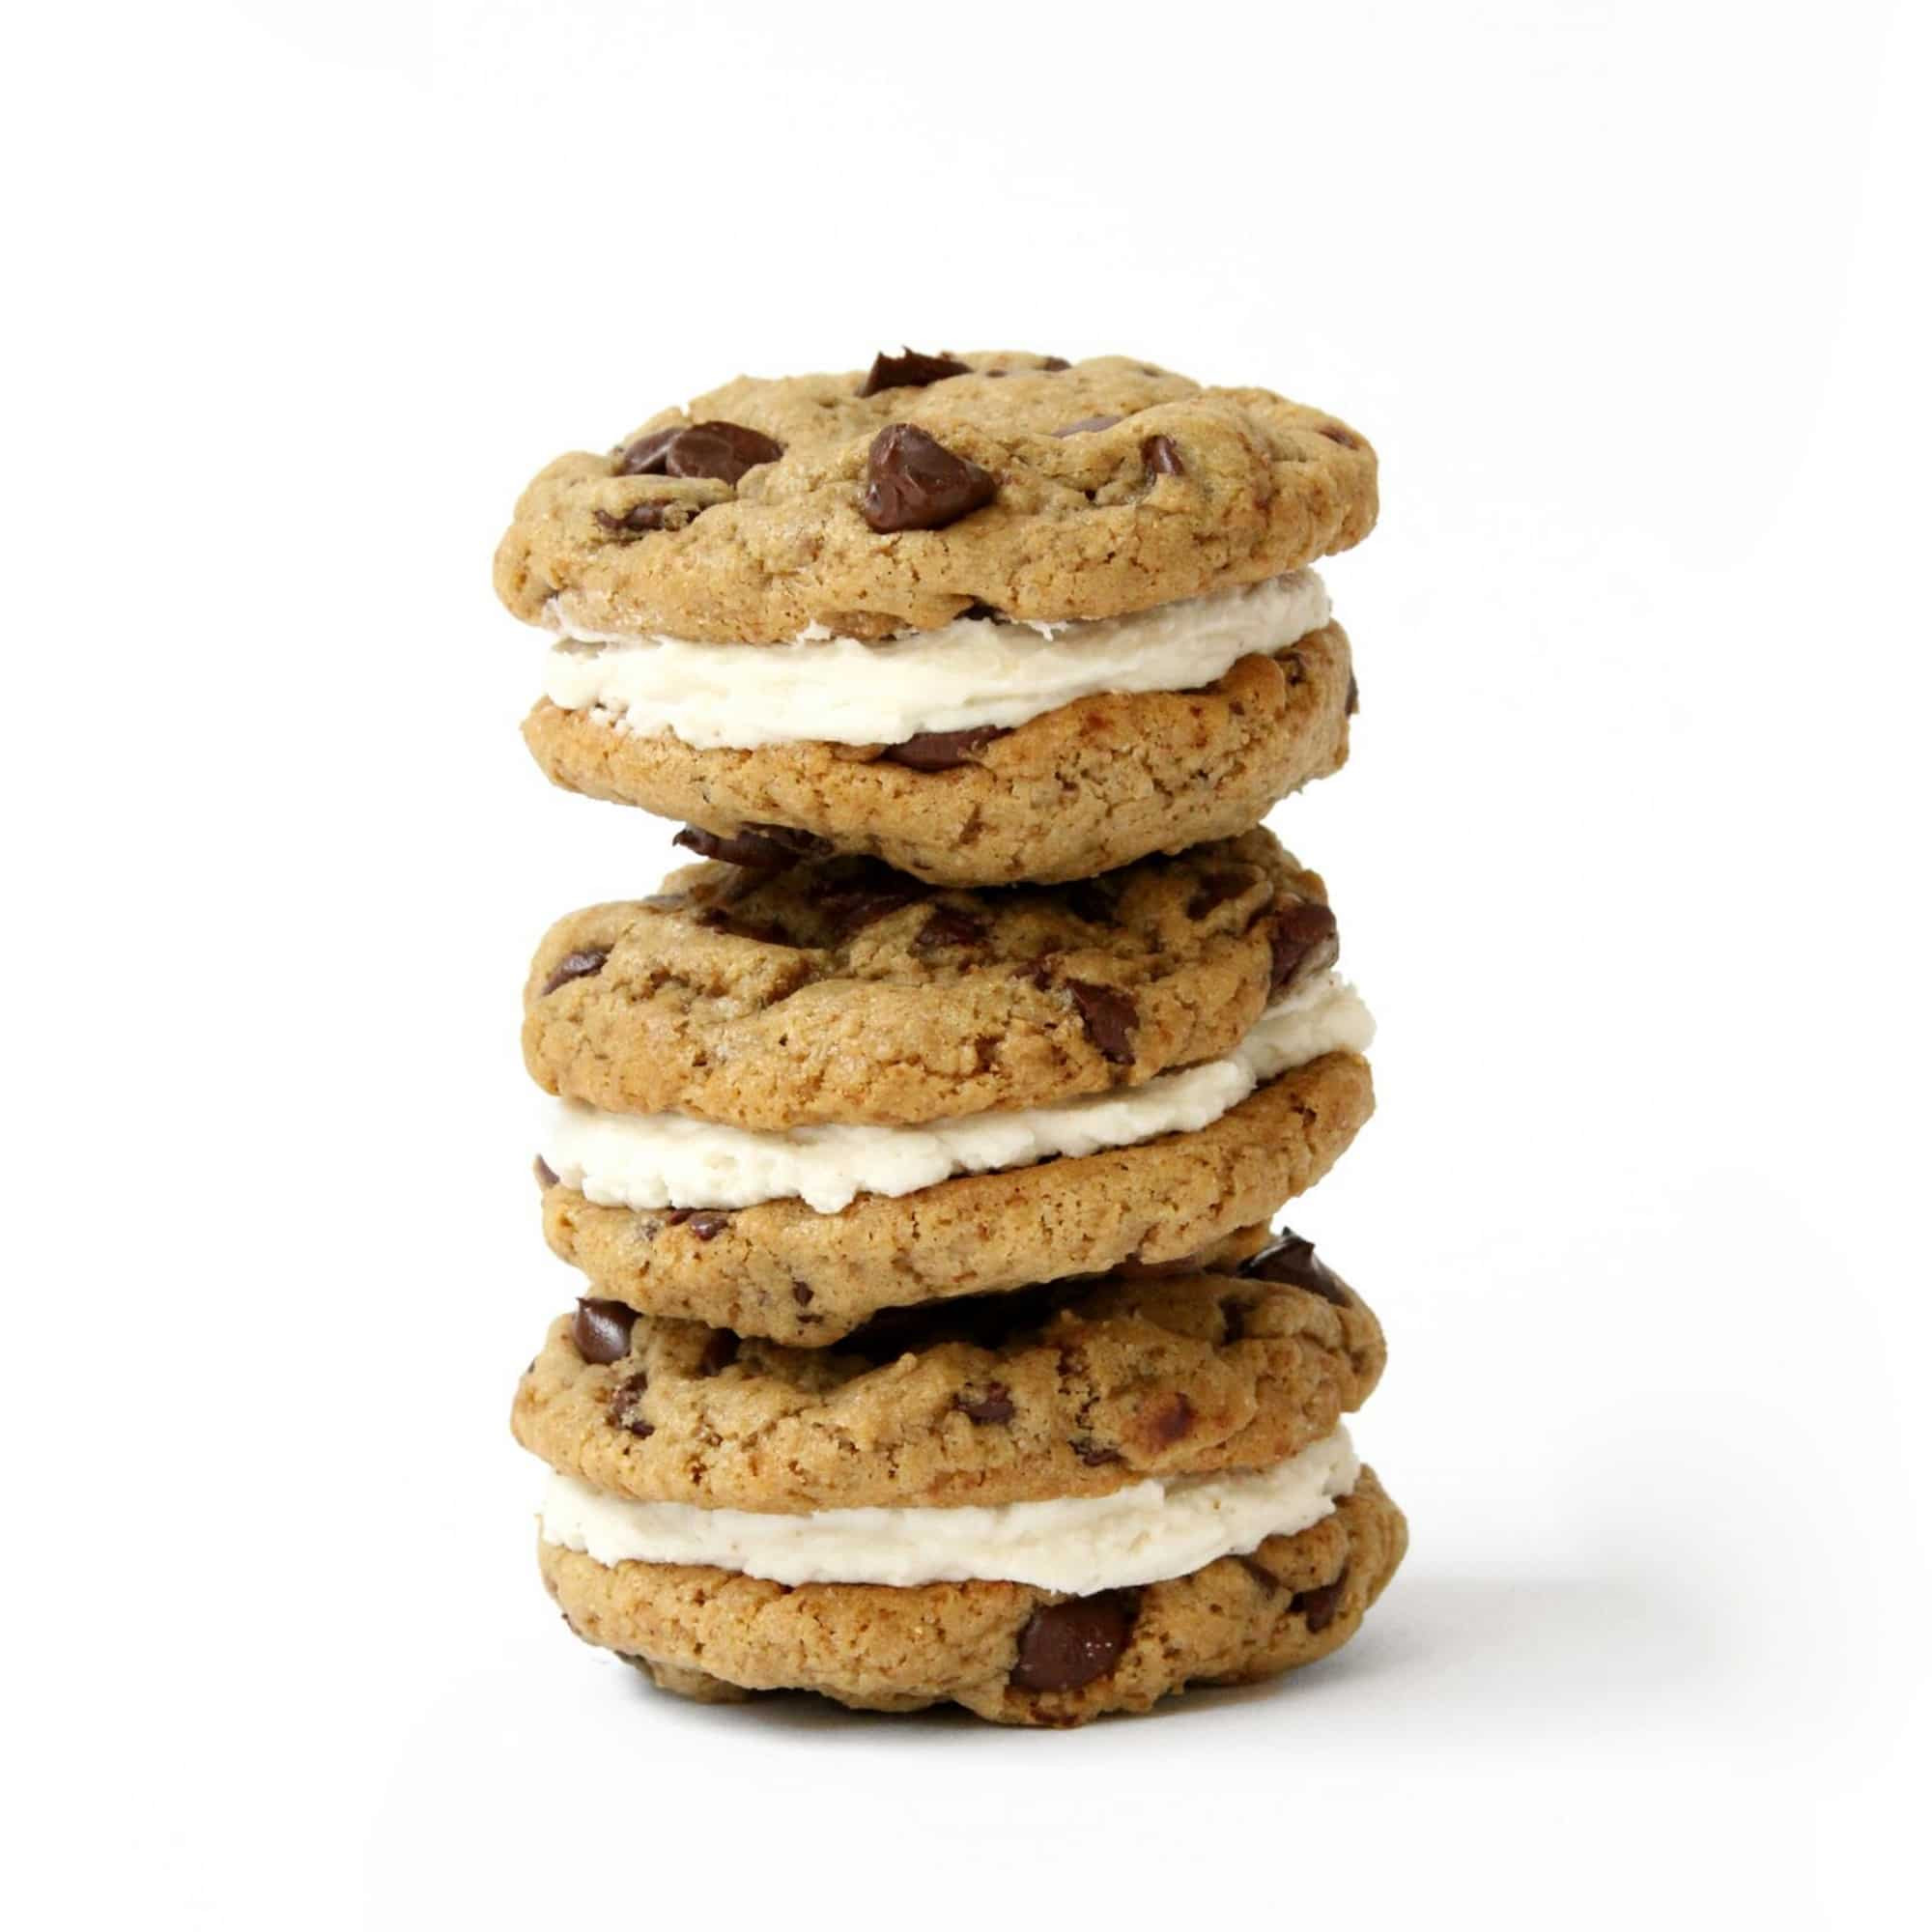 Organic Chocolate Chip Cookies
 Organic Cookie Mix [Chocolate Chip] Soft & Flavorful